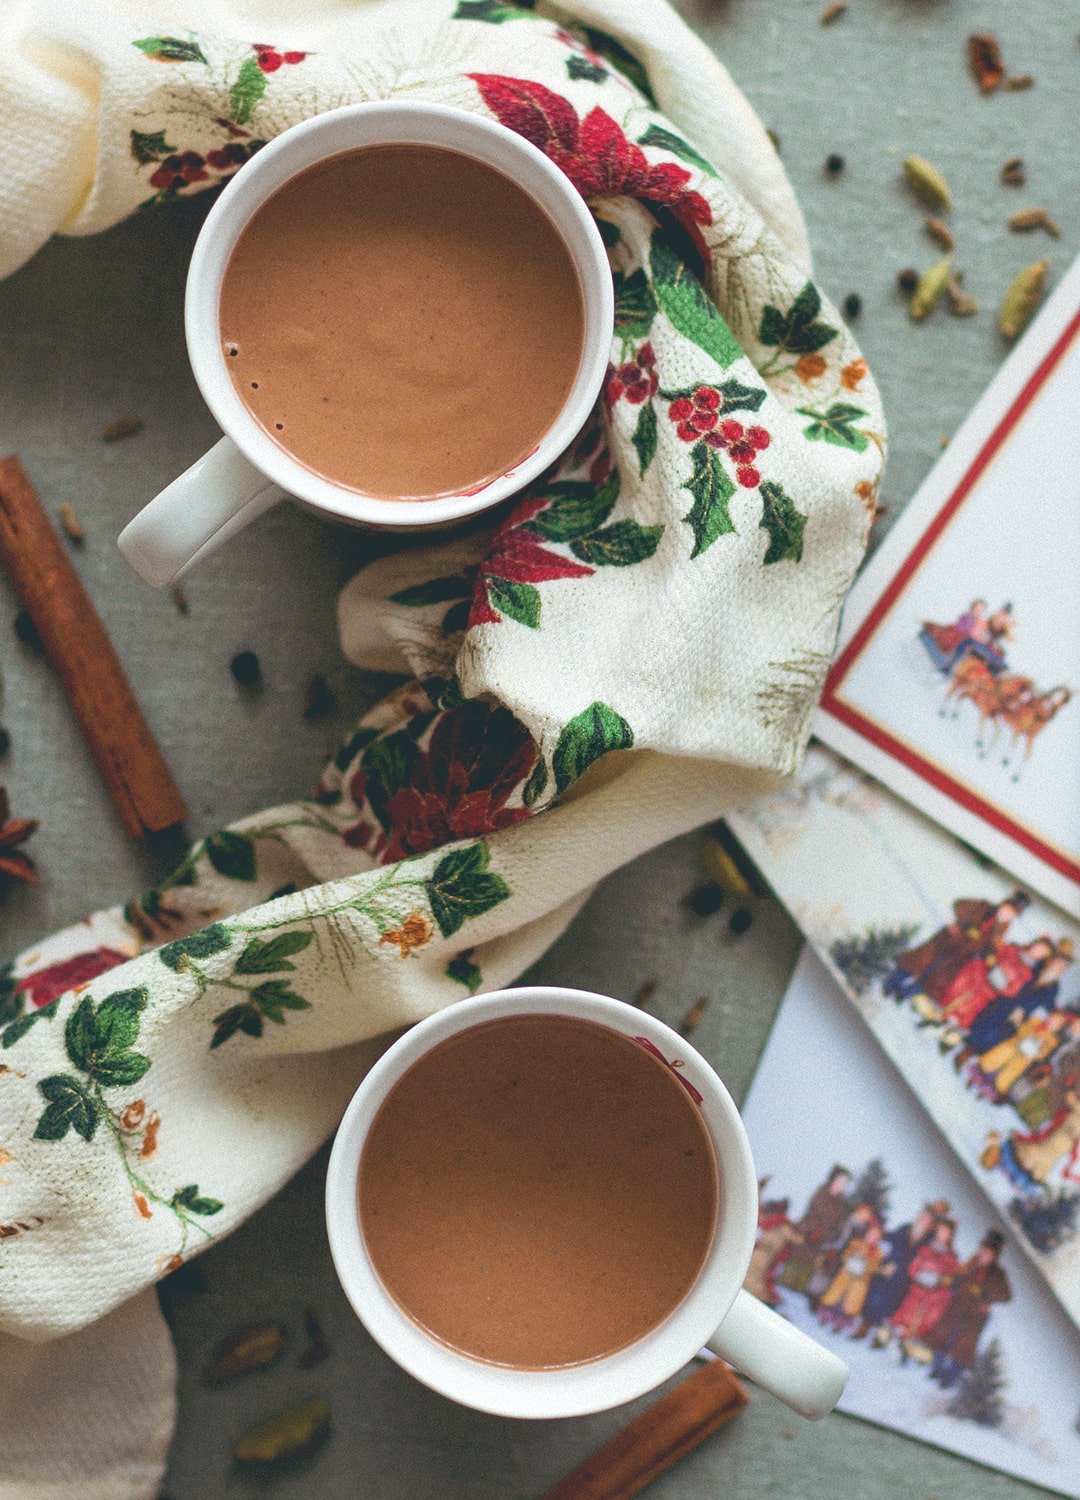 Almond Chai Hot Chocolate - incredibly creamy, delicious, and sweet. Almond milk, cacao, almond butter, tahini, homemade chai spice mix, sea salt, and maple syrup. So yummy! You'll love this hot chocolate, it's so easy to make. (vegan, GF) | thehealthfulideas.com